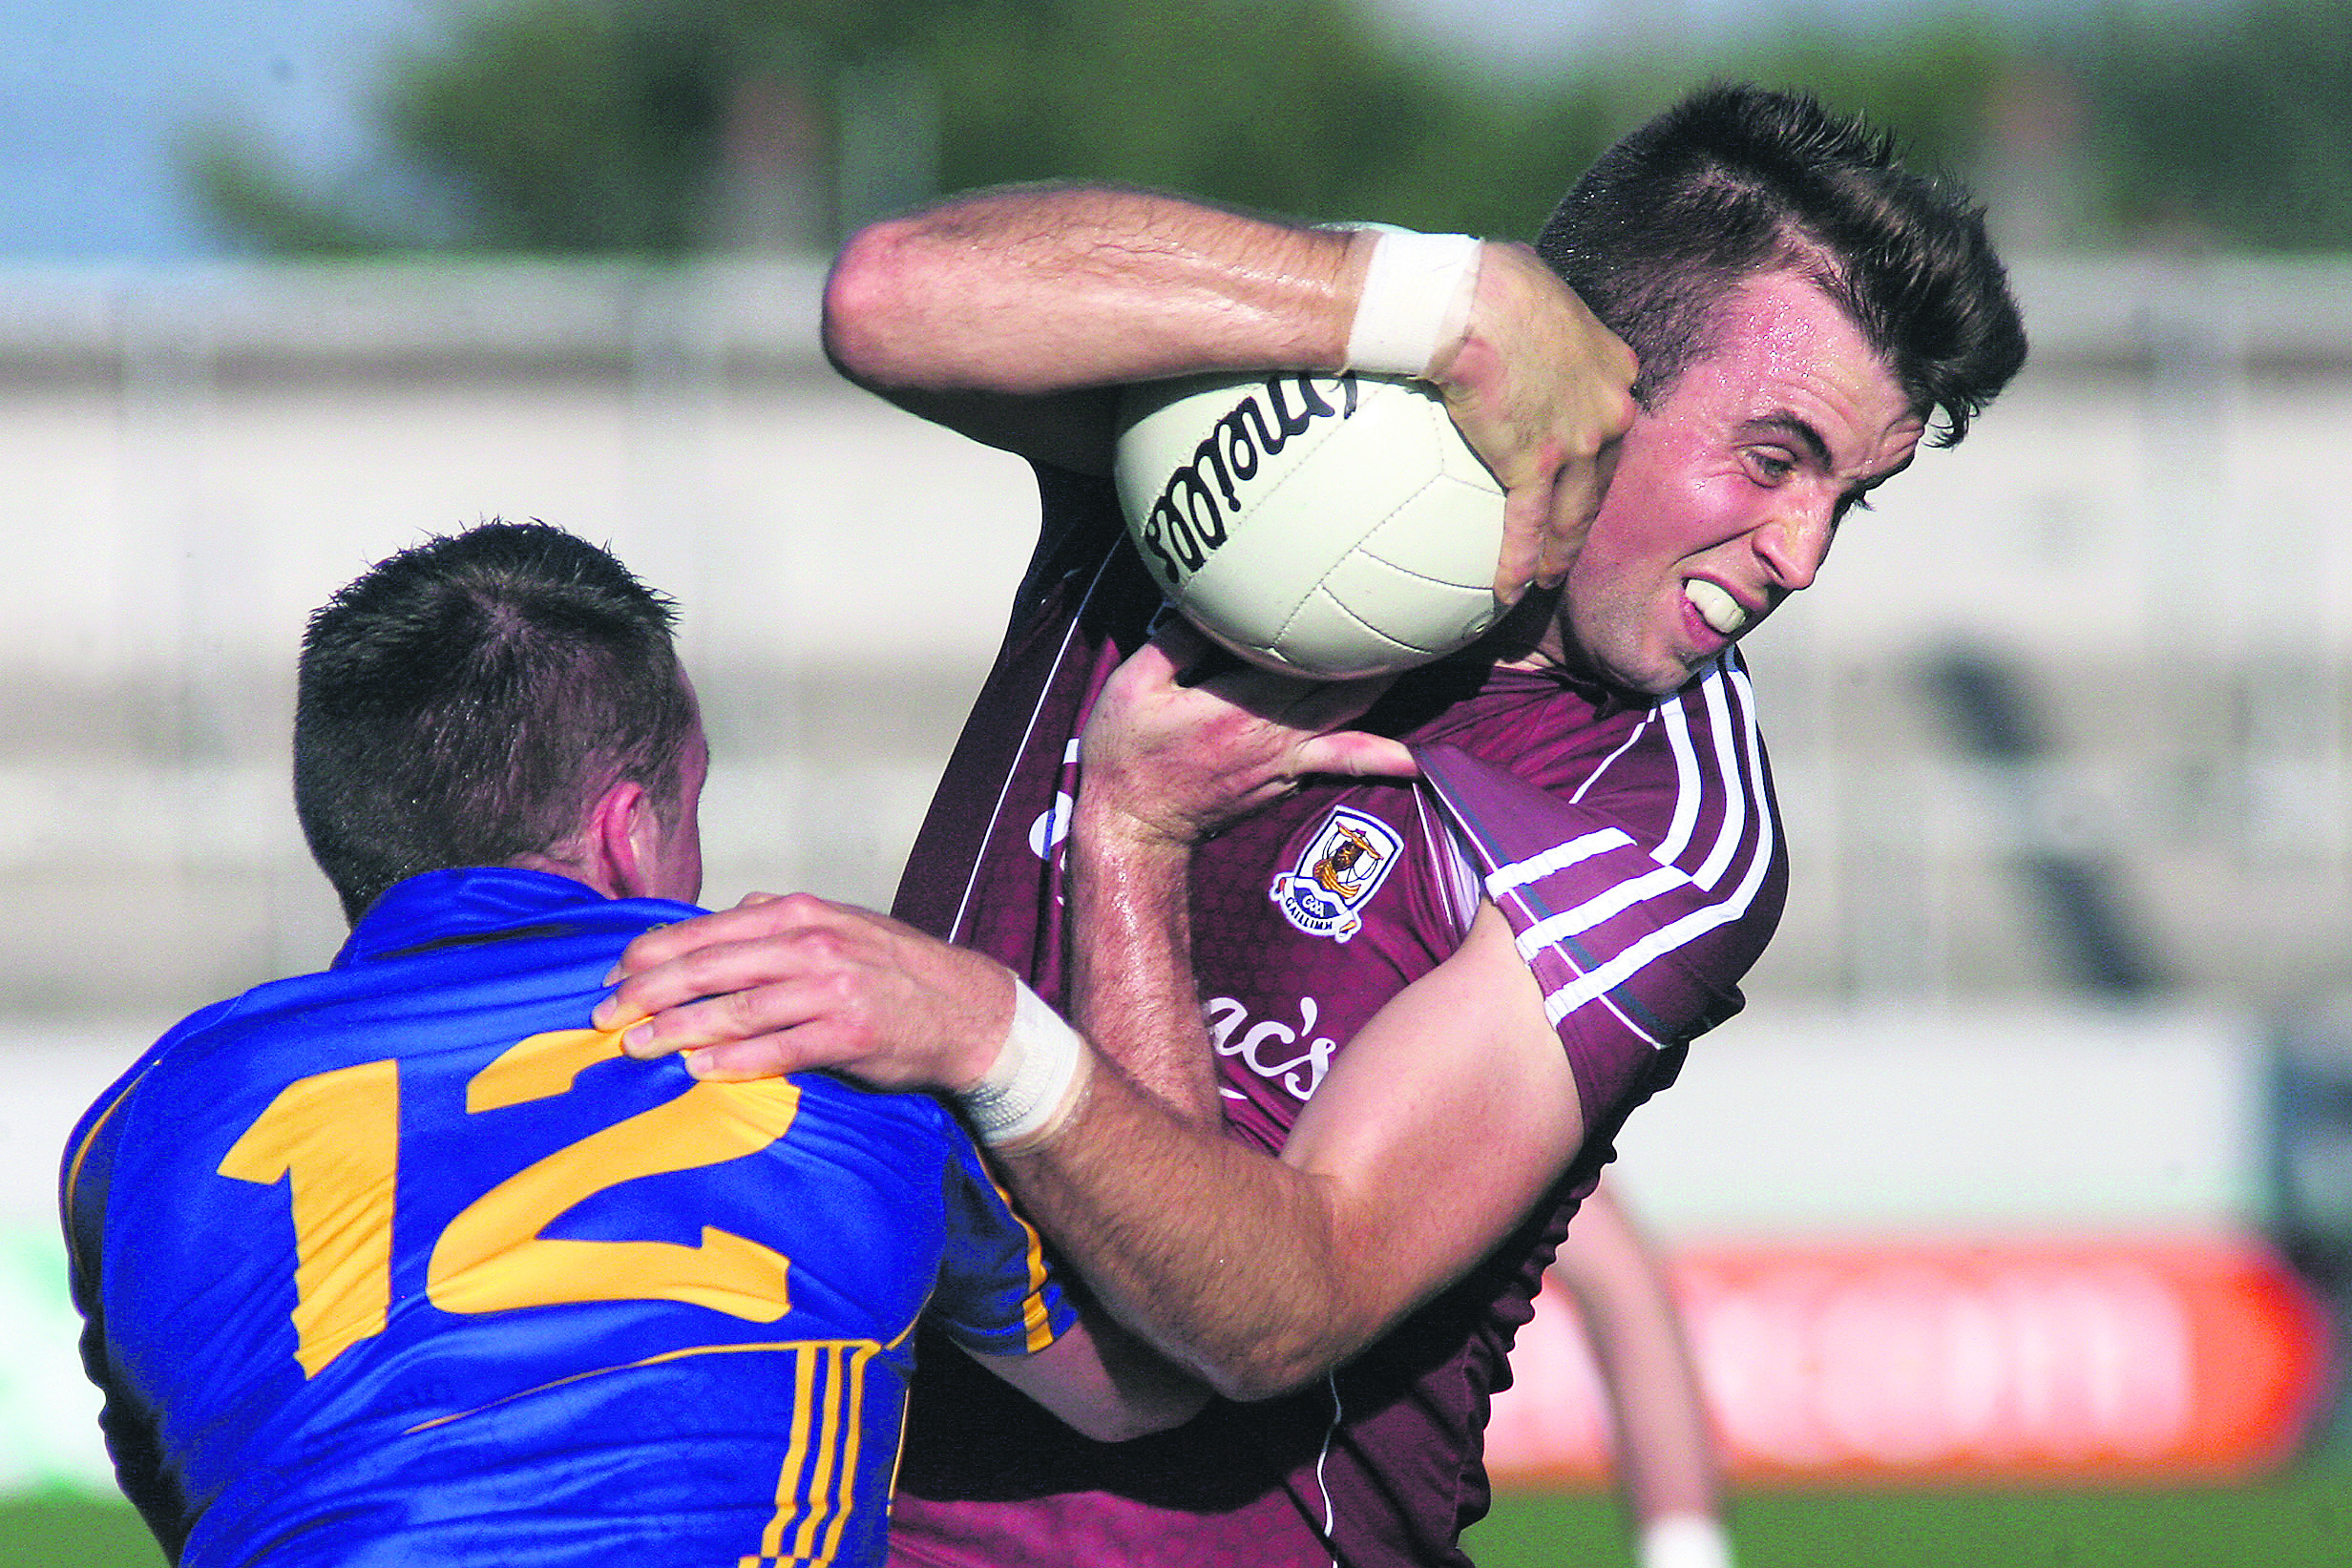 Galway football captain Paul Conroy believes Galway are better prepared than in 2008